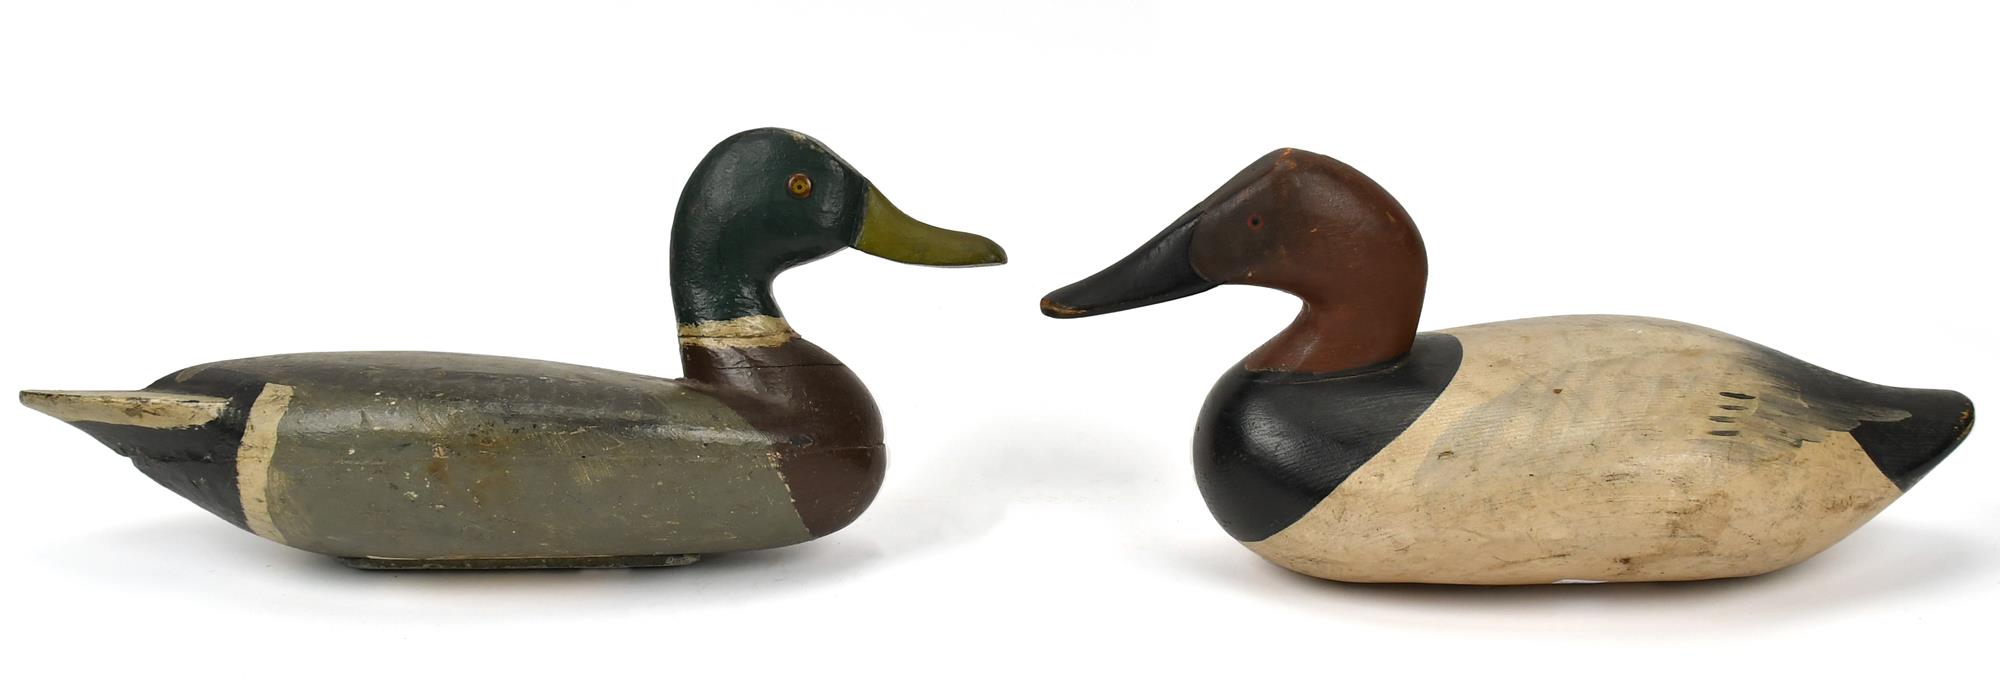 TWO DUCK DECOYS Canvasback duck 3accbc